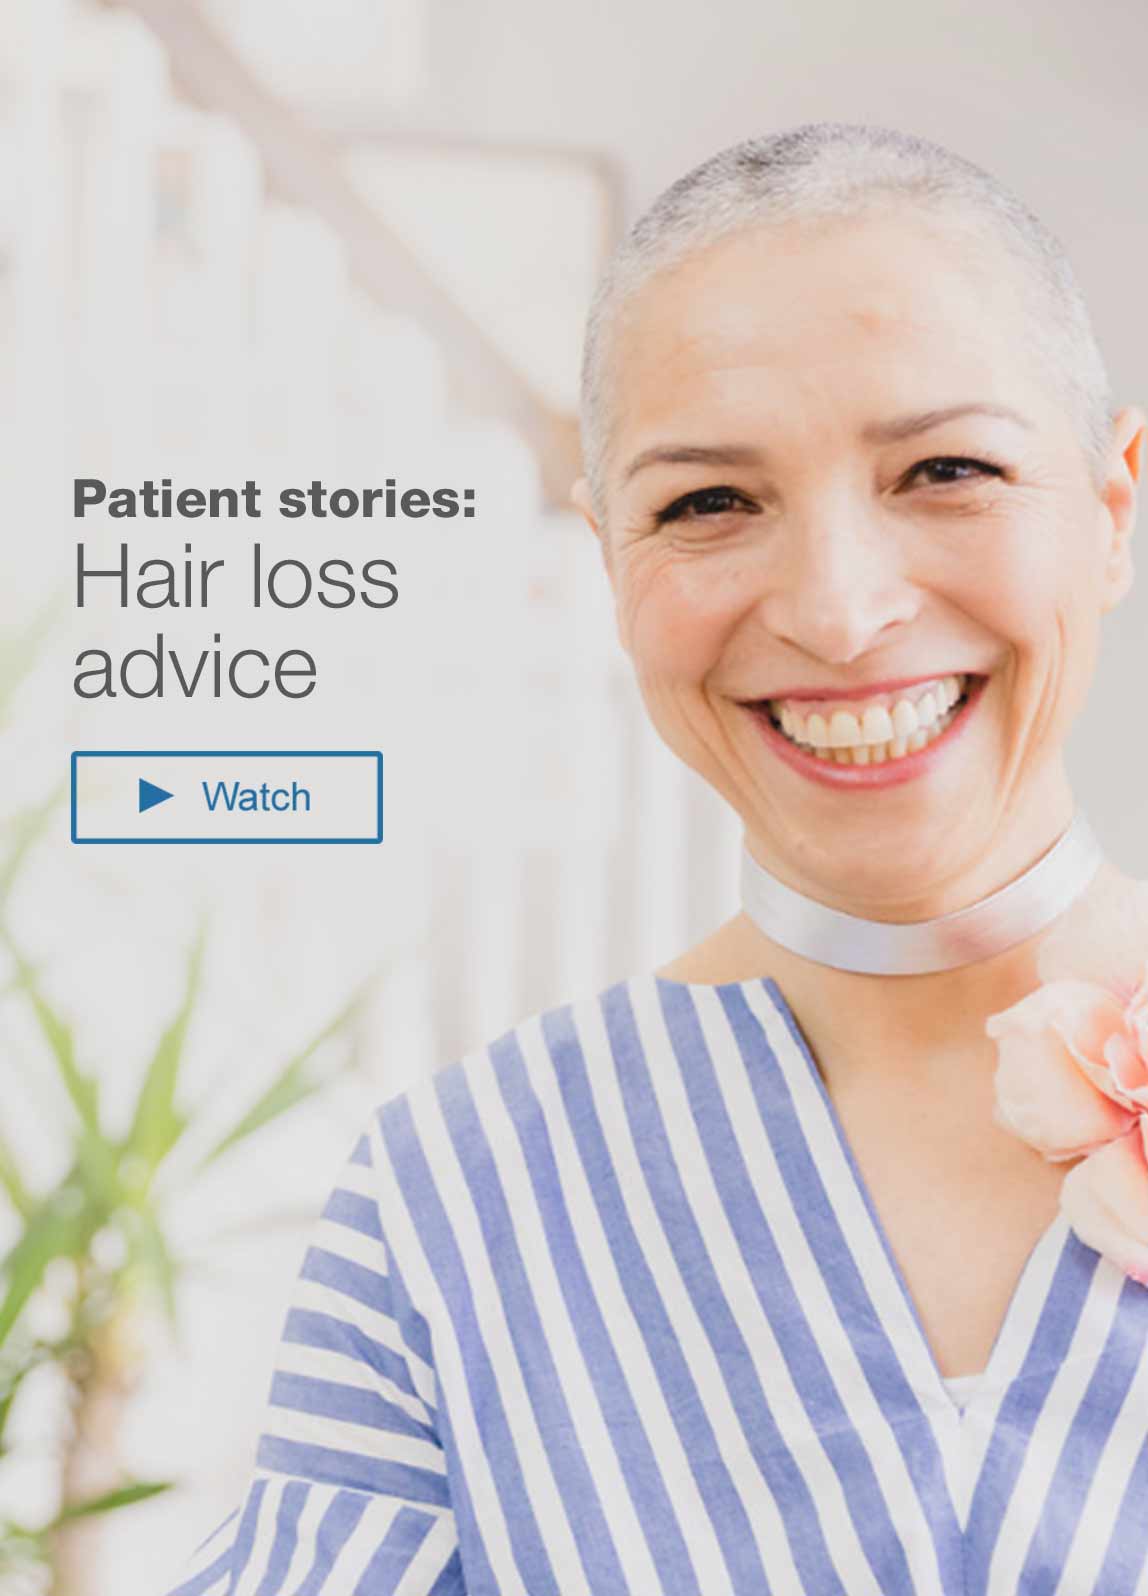 Patient stories: Hair loss advice. Watch.